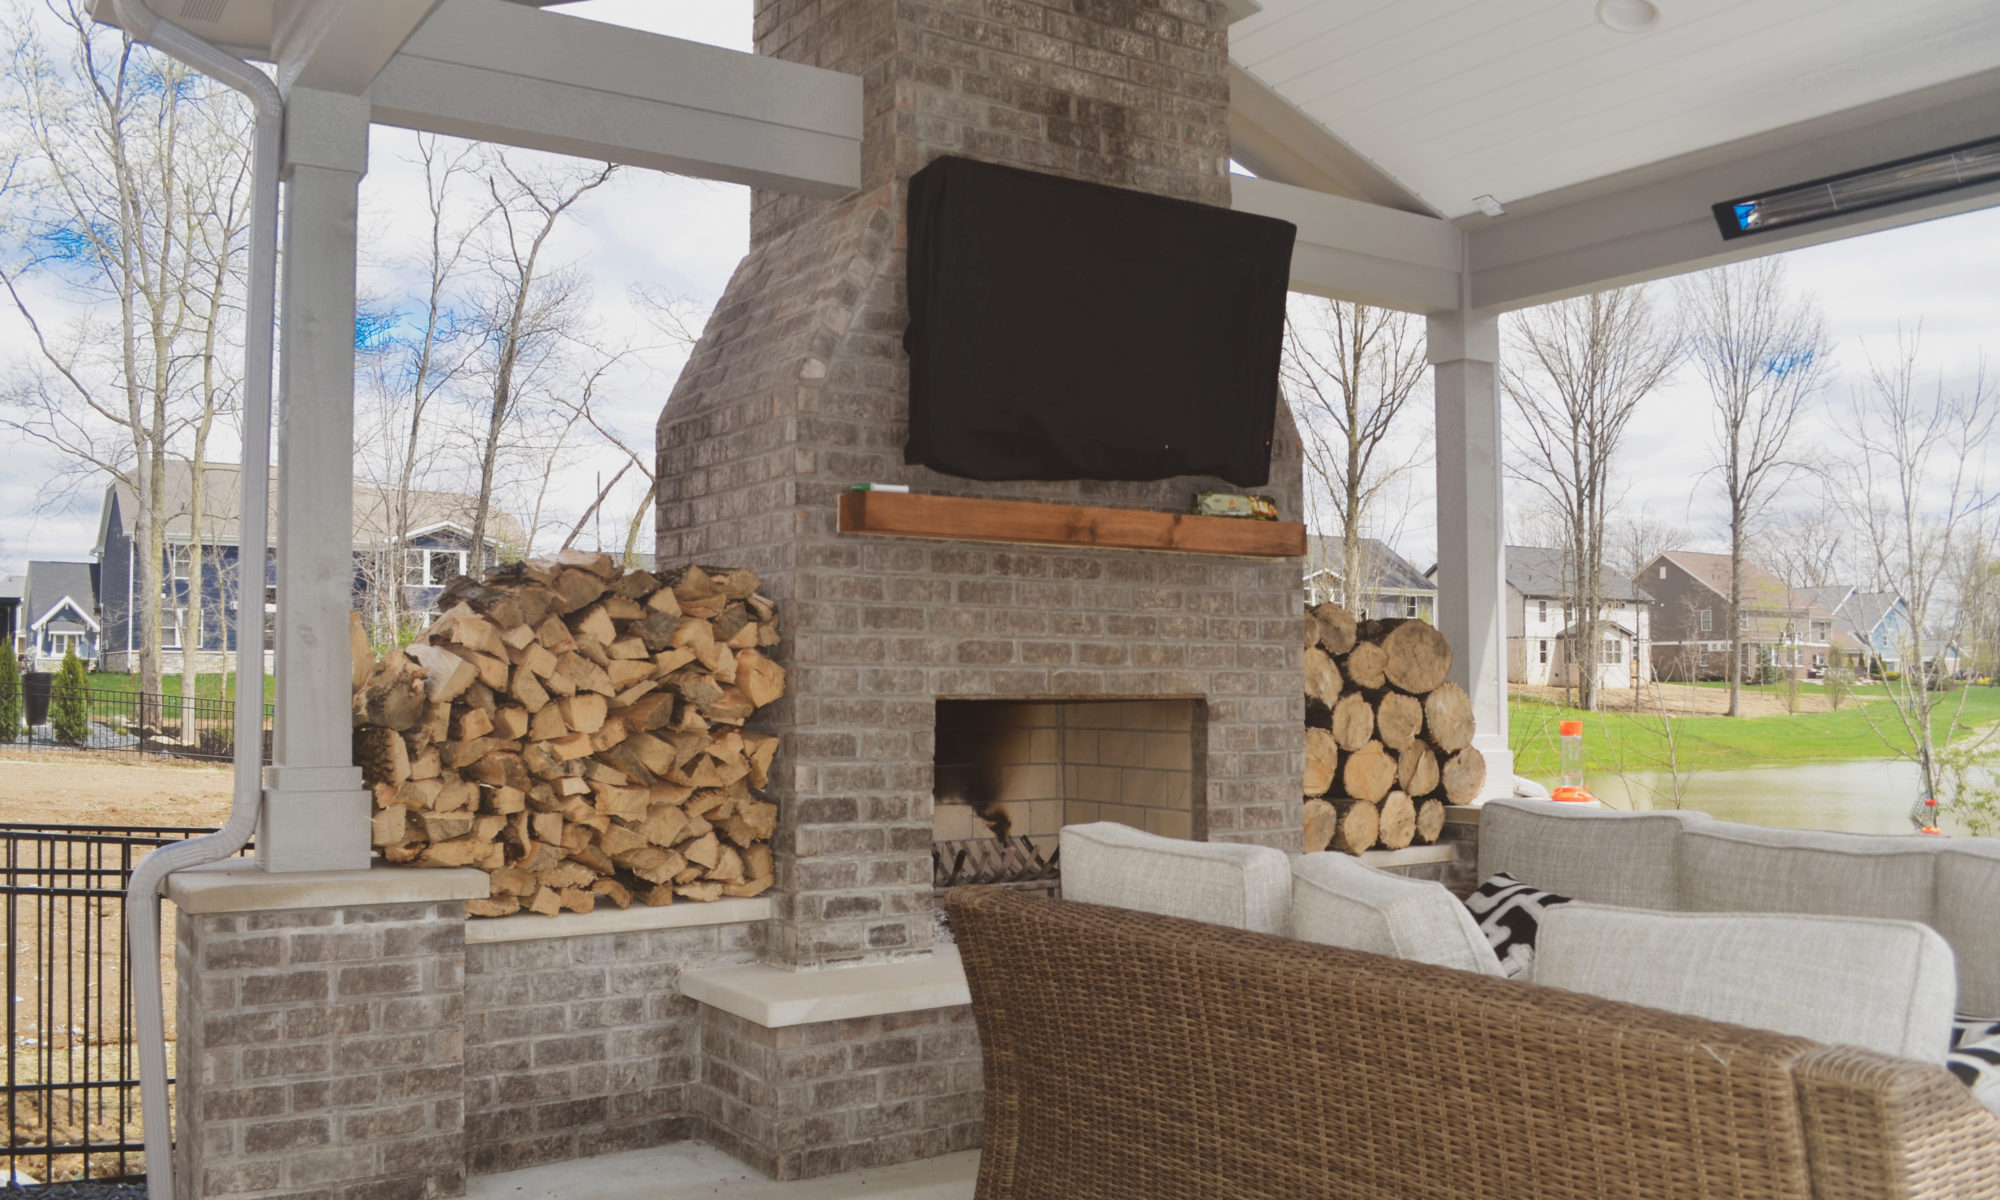 Precision Outdoors poolside at thorp creek gable roof structure fireplace fire wood storage concrete patio landscaping pool backyard summer entertaining outdoor fan heater rest and relaxation indianapolis indiana